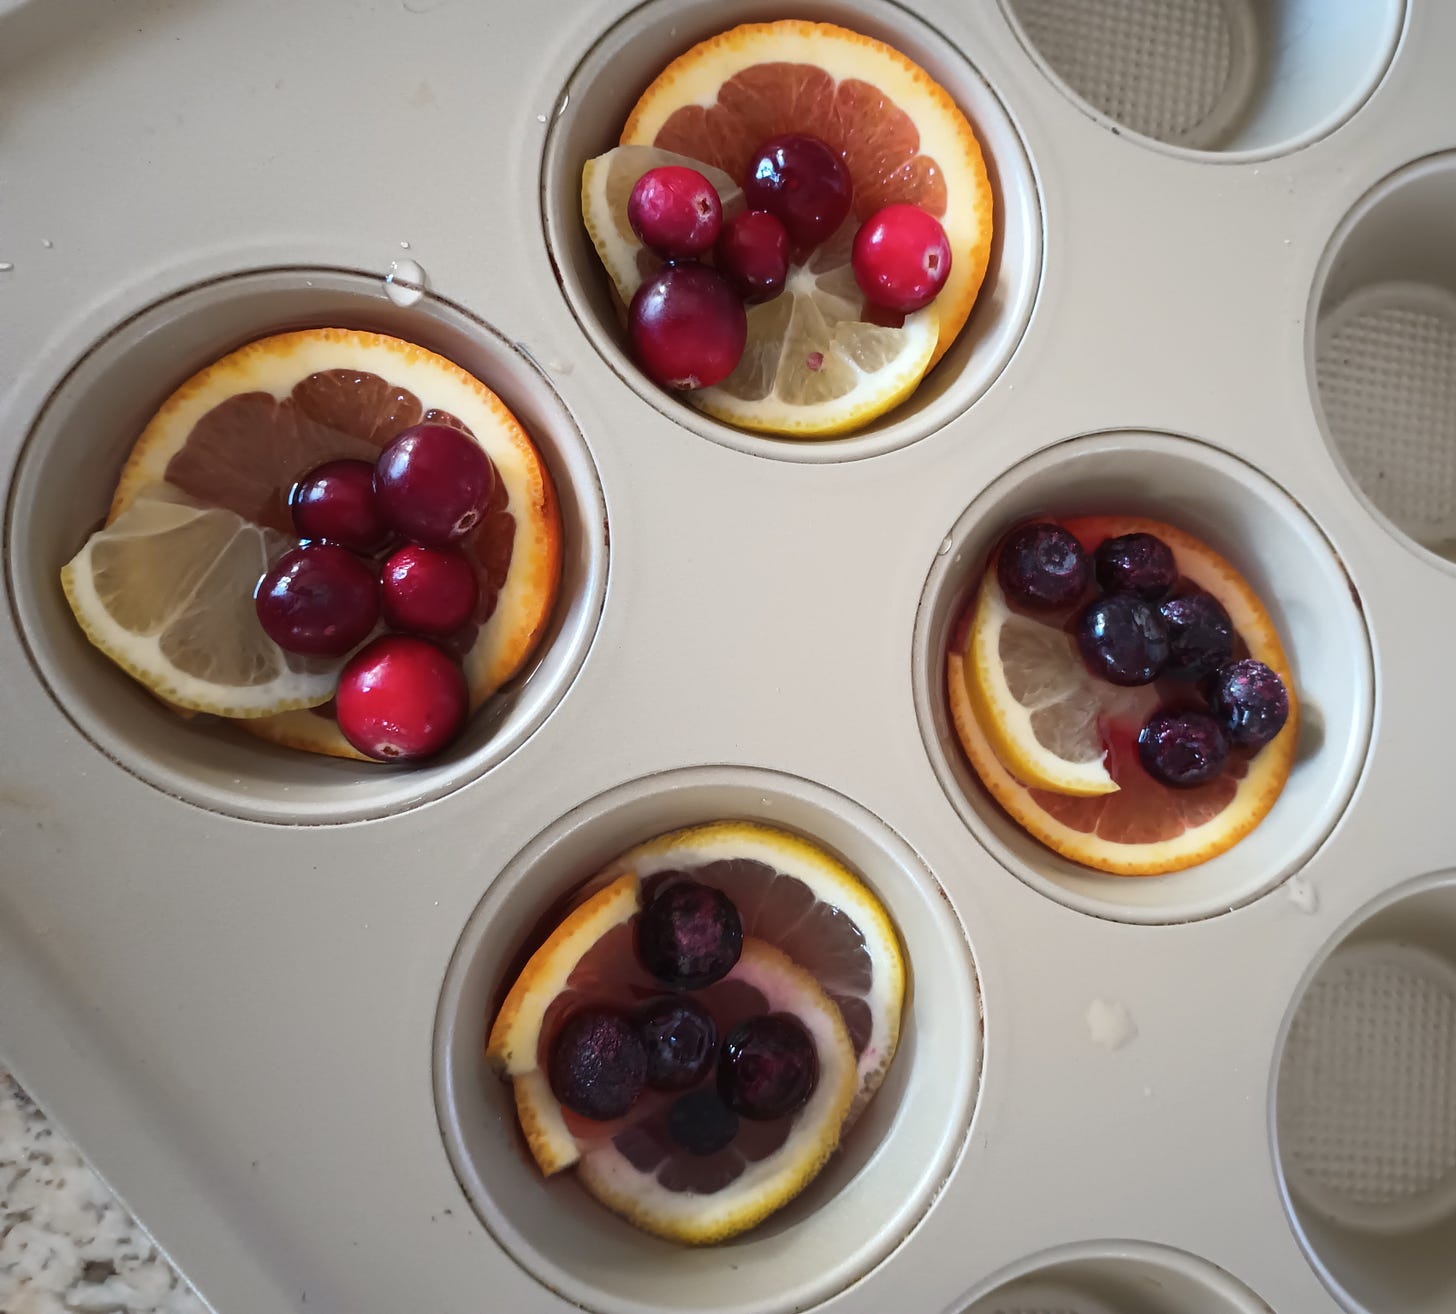 muffin tins with orange and lemon slices, cranberries and blueberries